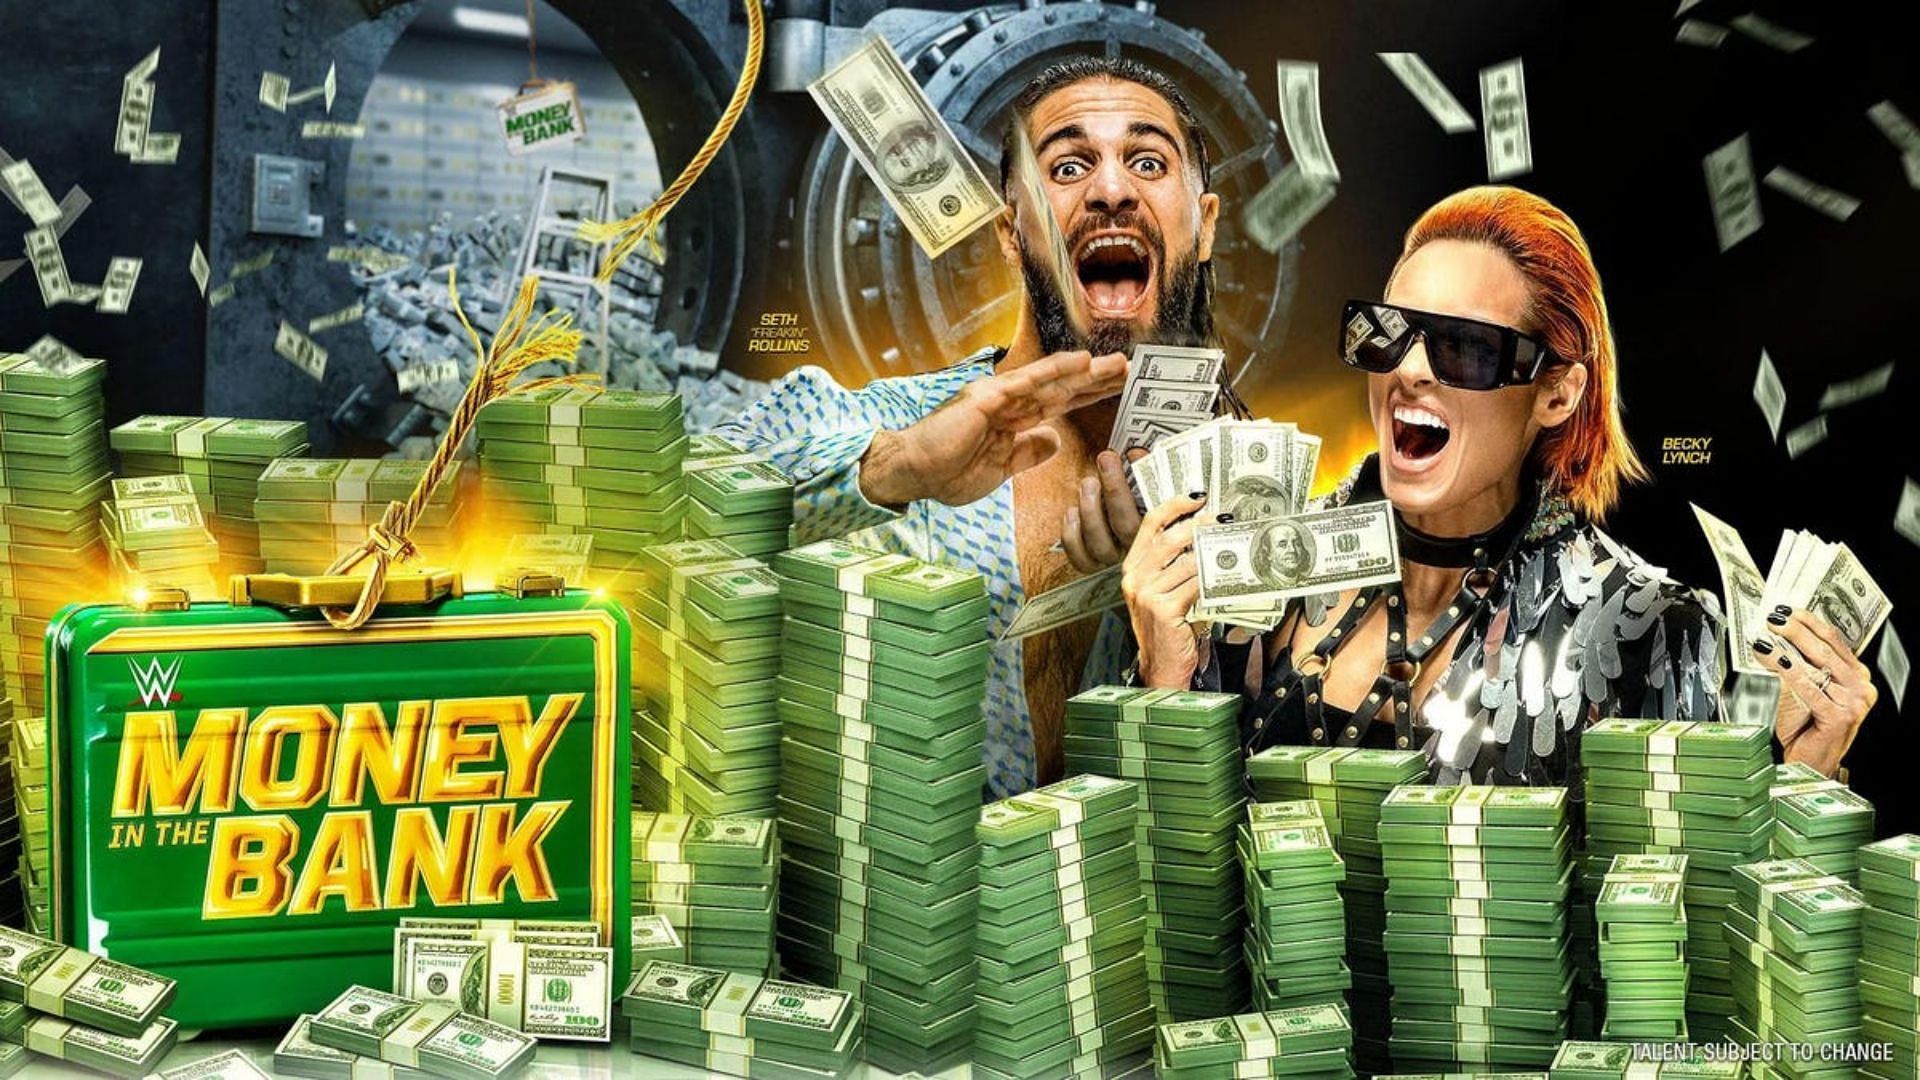 The 2022 edition of Money in the Bank was uneventful and mostly lacking in substance.